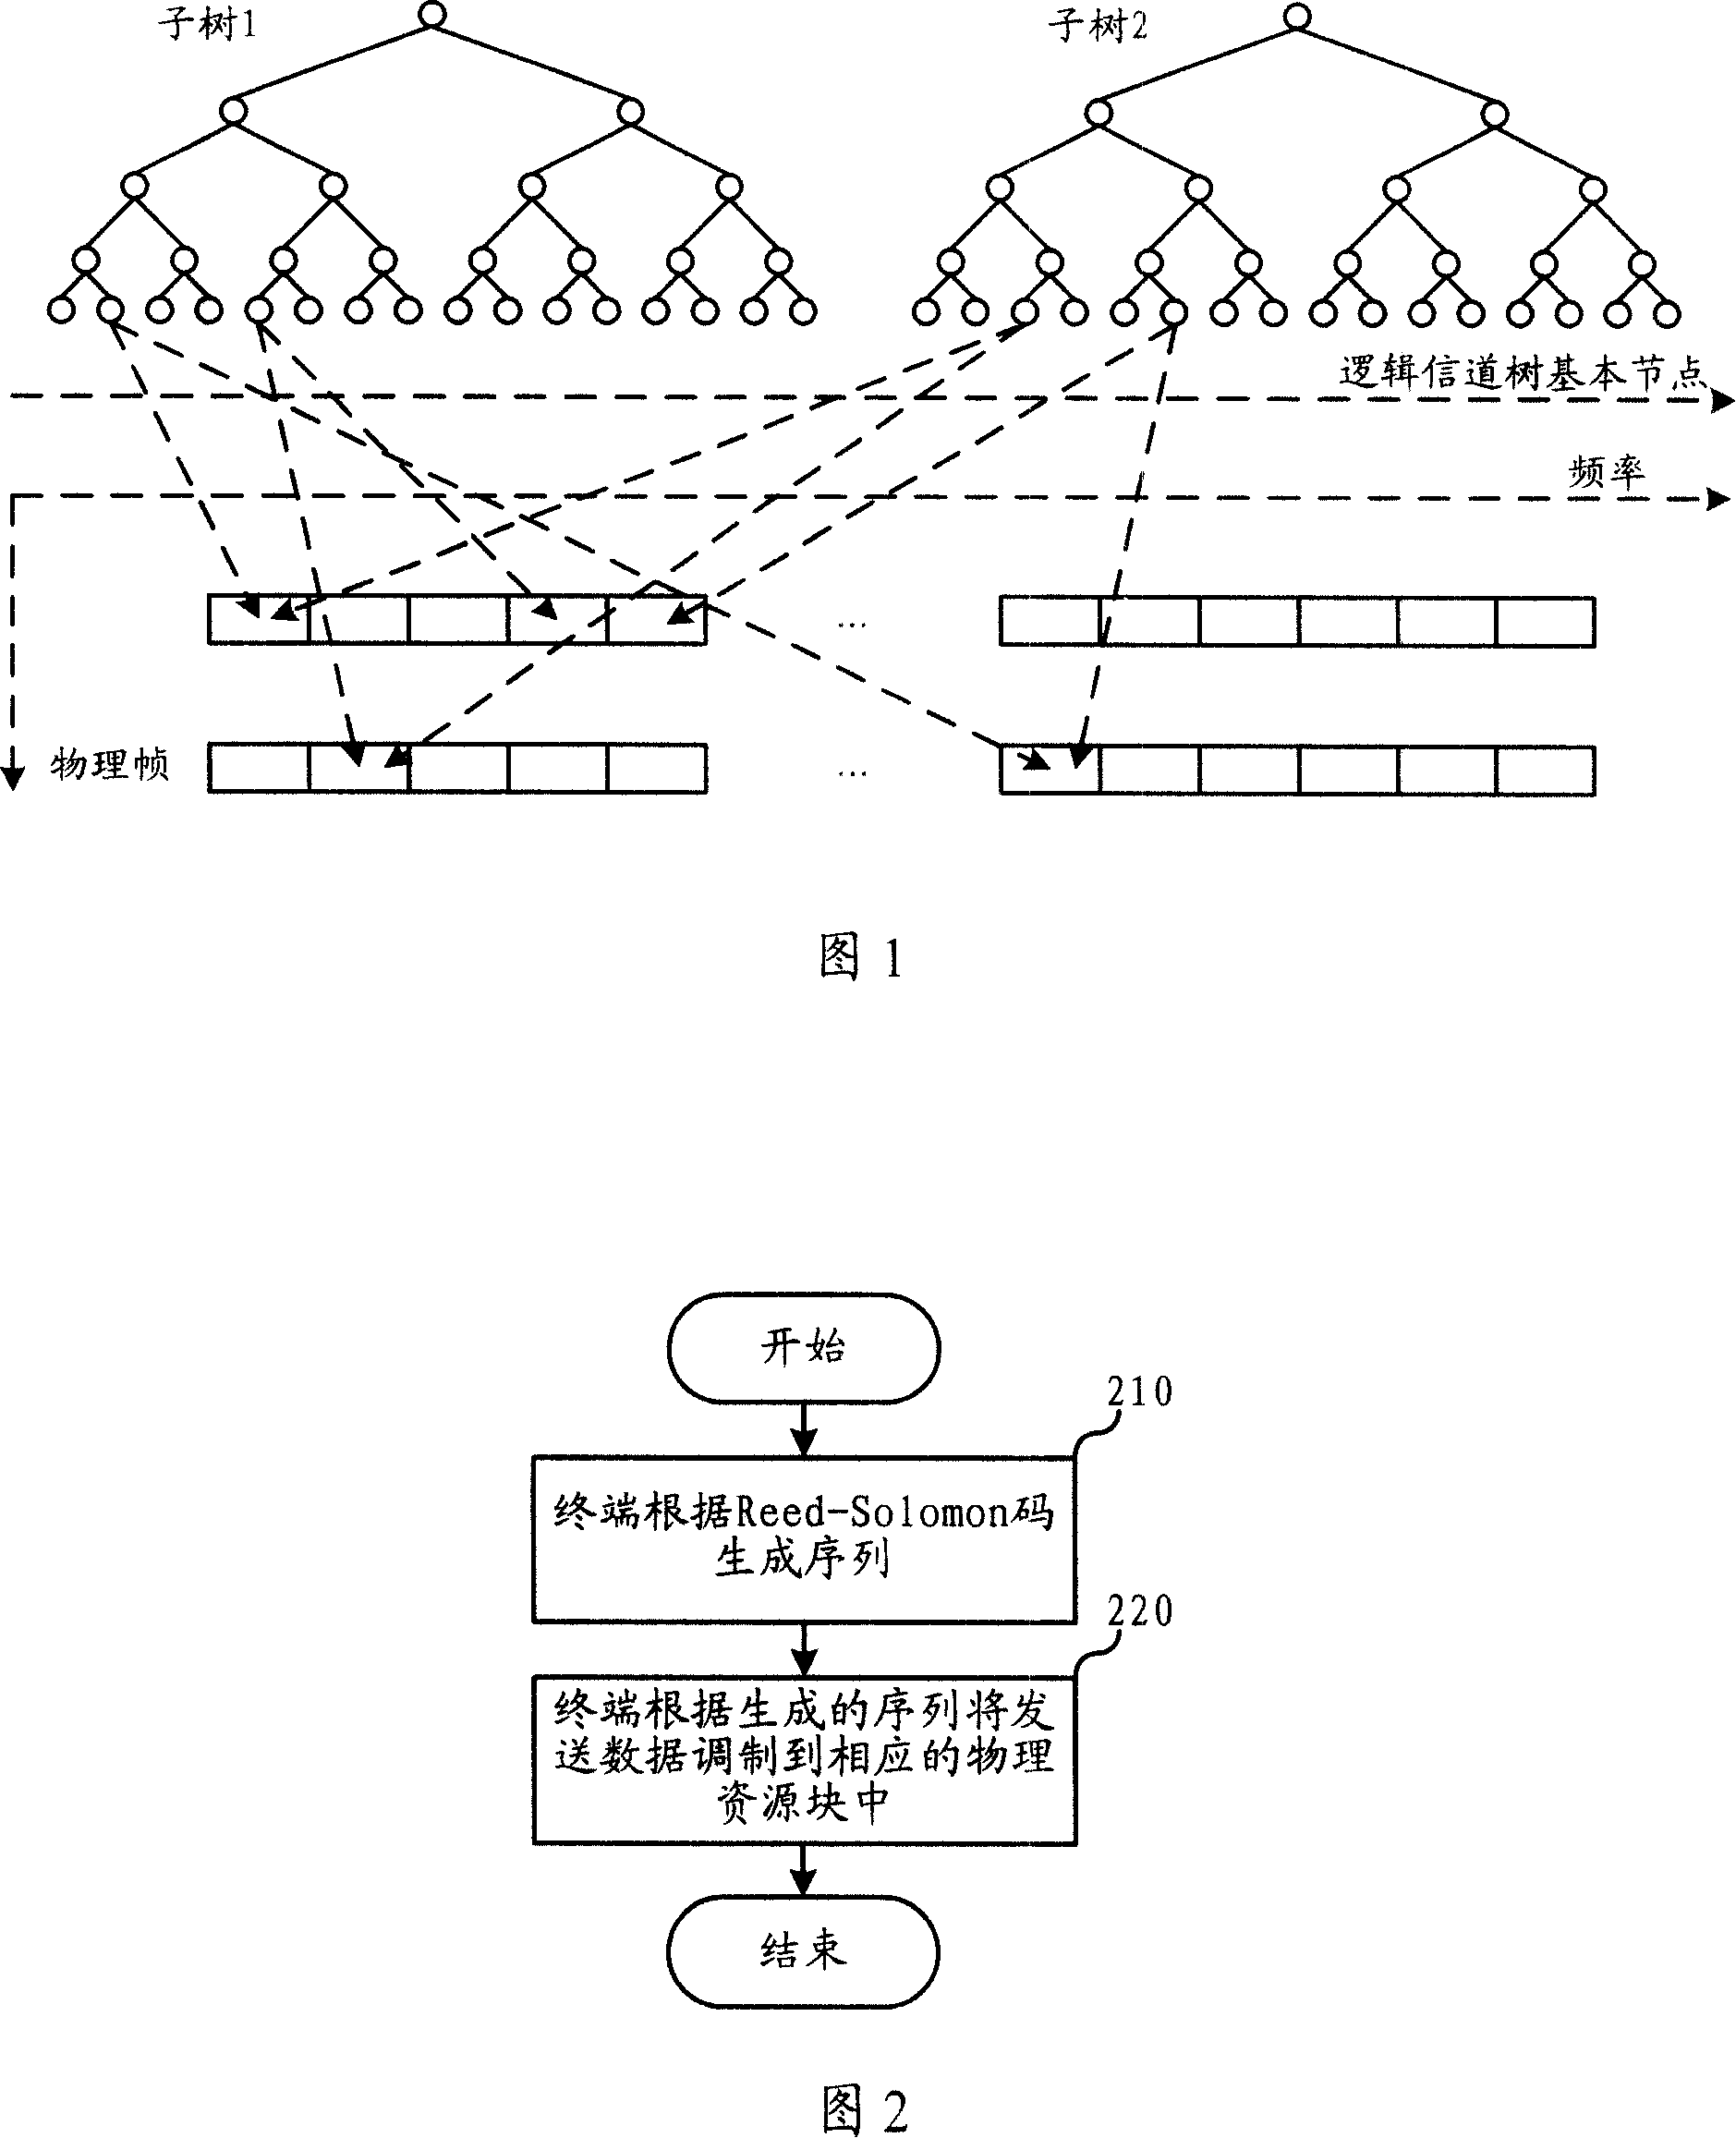 Channel resource block mapping method and apparatus